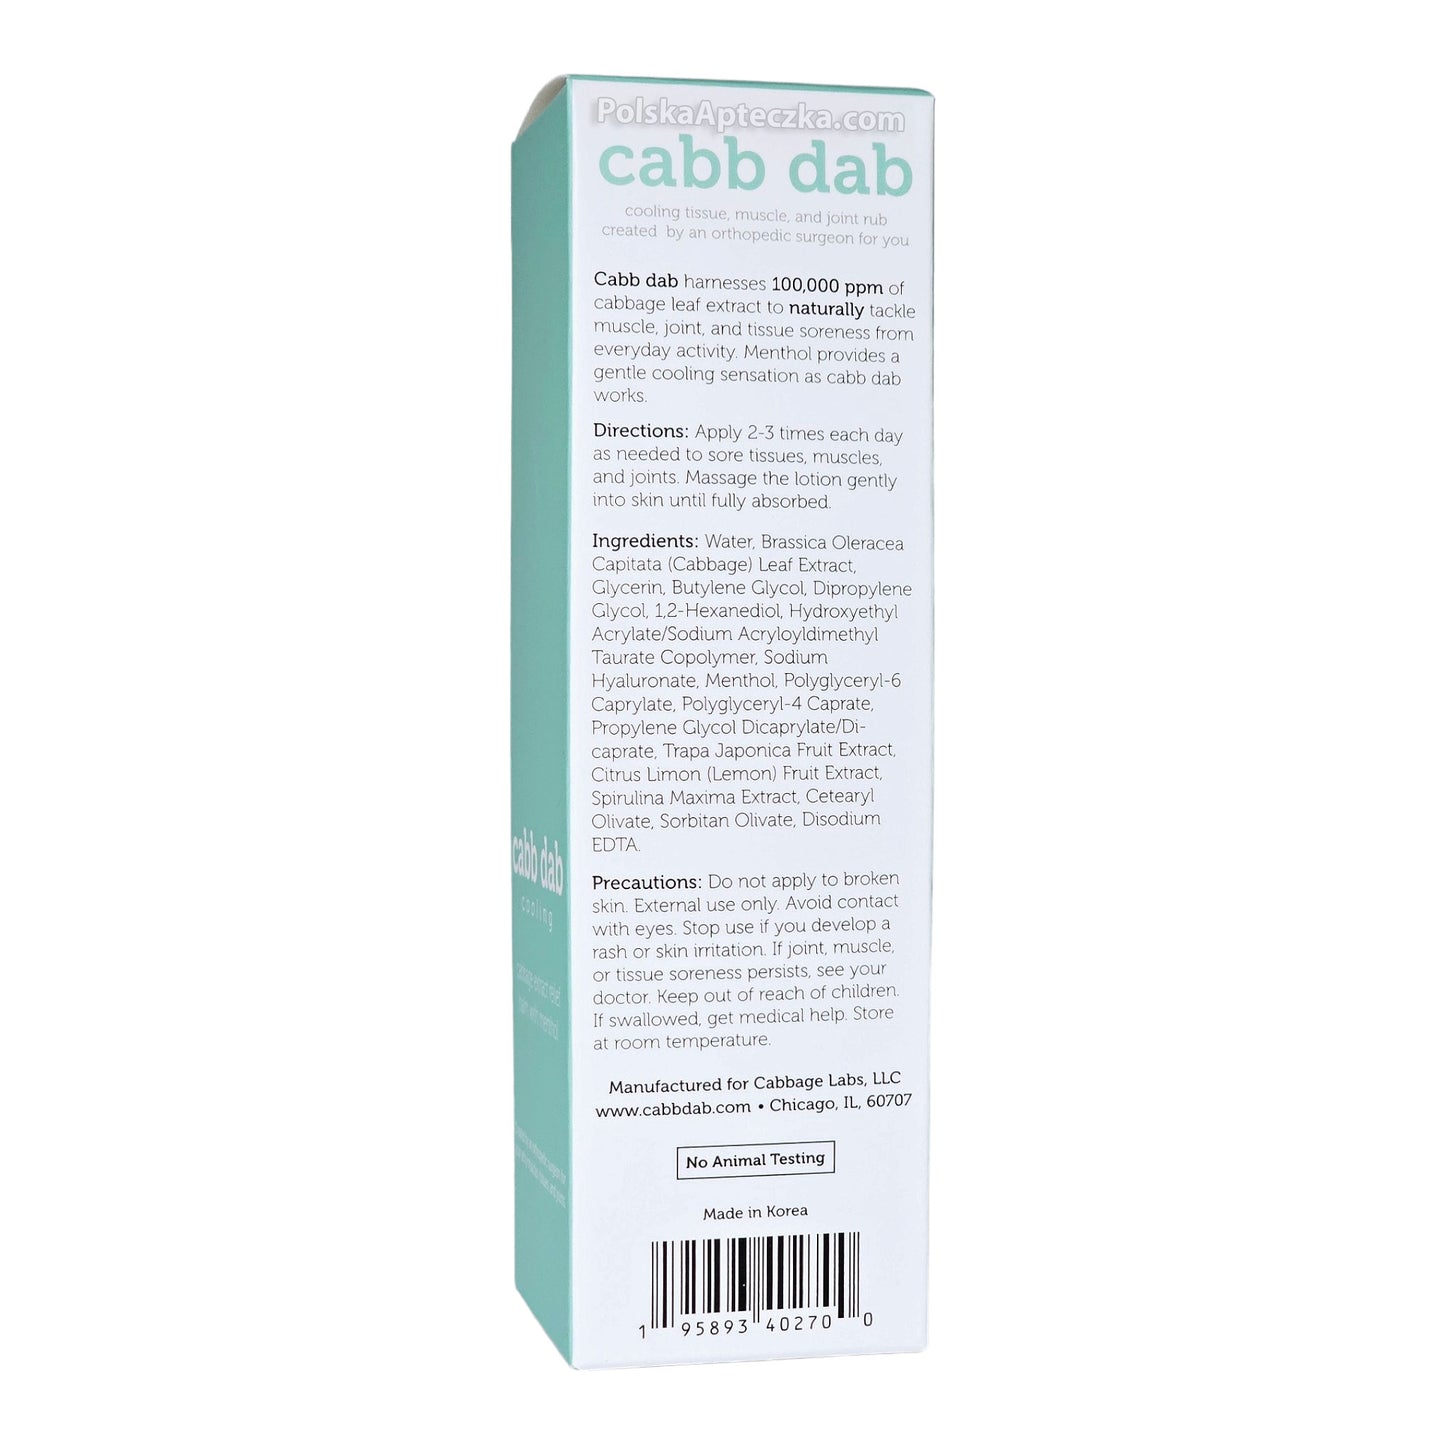 cabb dab cooling relief balm